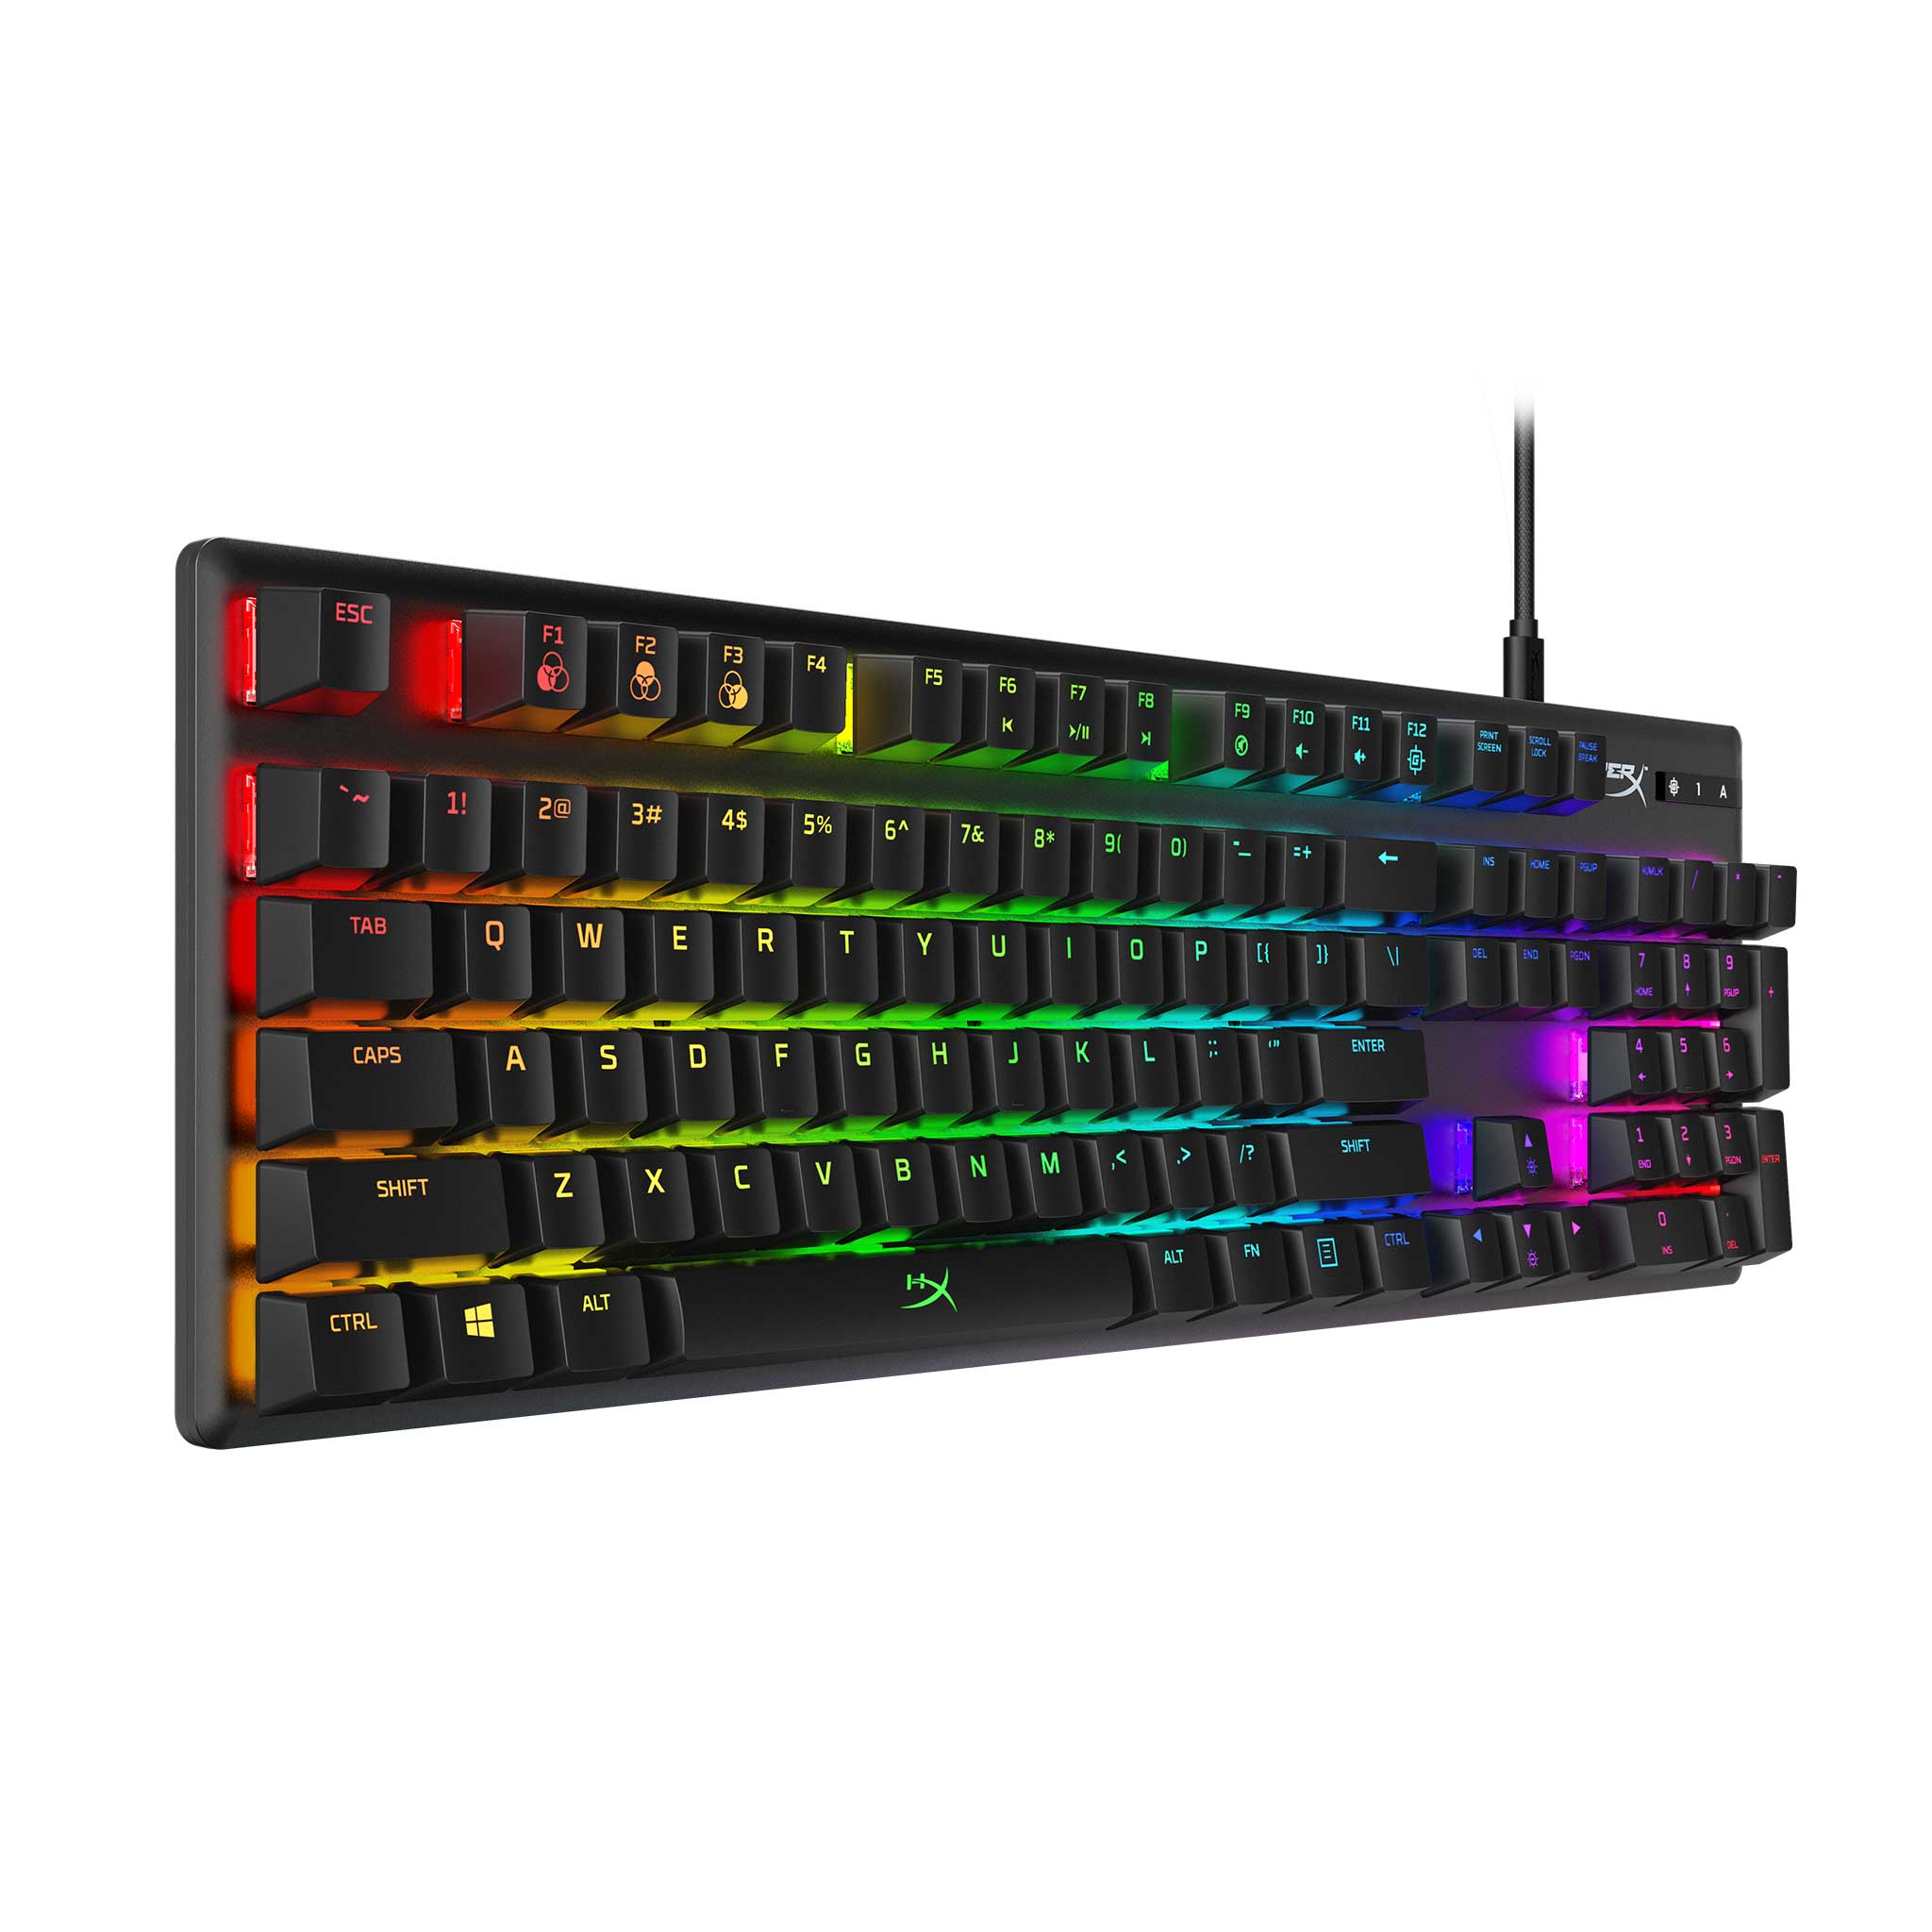 HyperX Alloy Origins RGB Mechanical Gaming Keyboard (Red Switches)